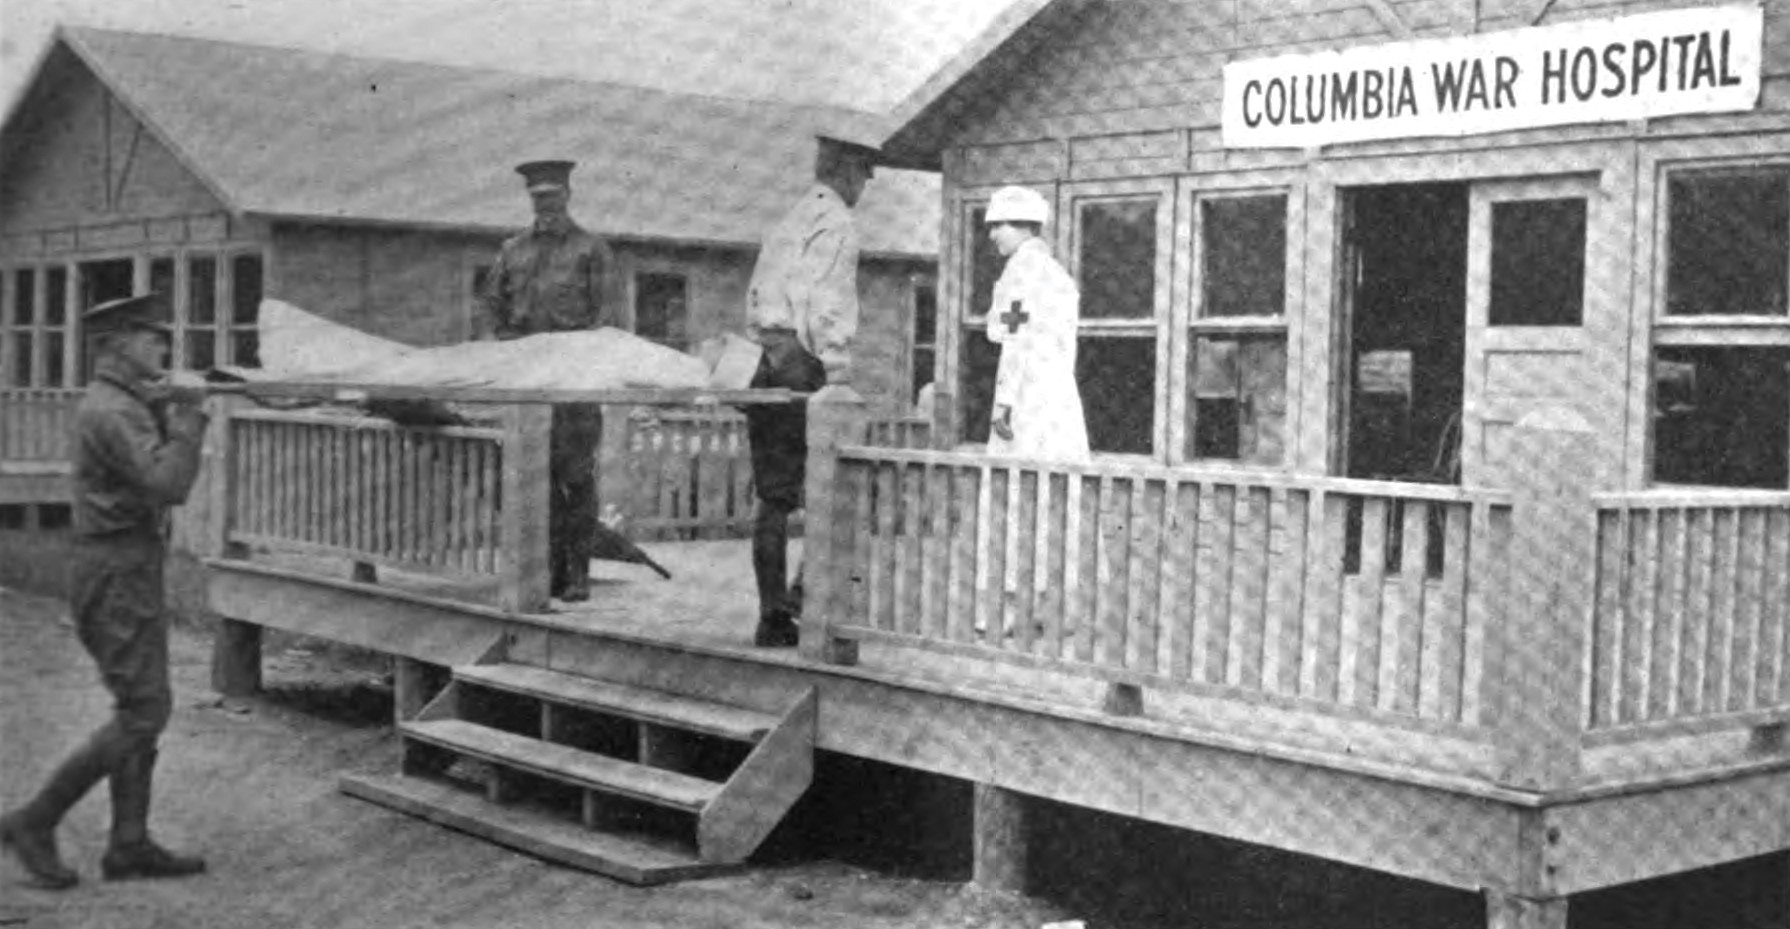 black and white image of soldiers carrying a wounded individual into Columbia War Hospital 